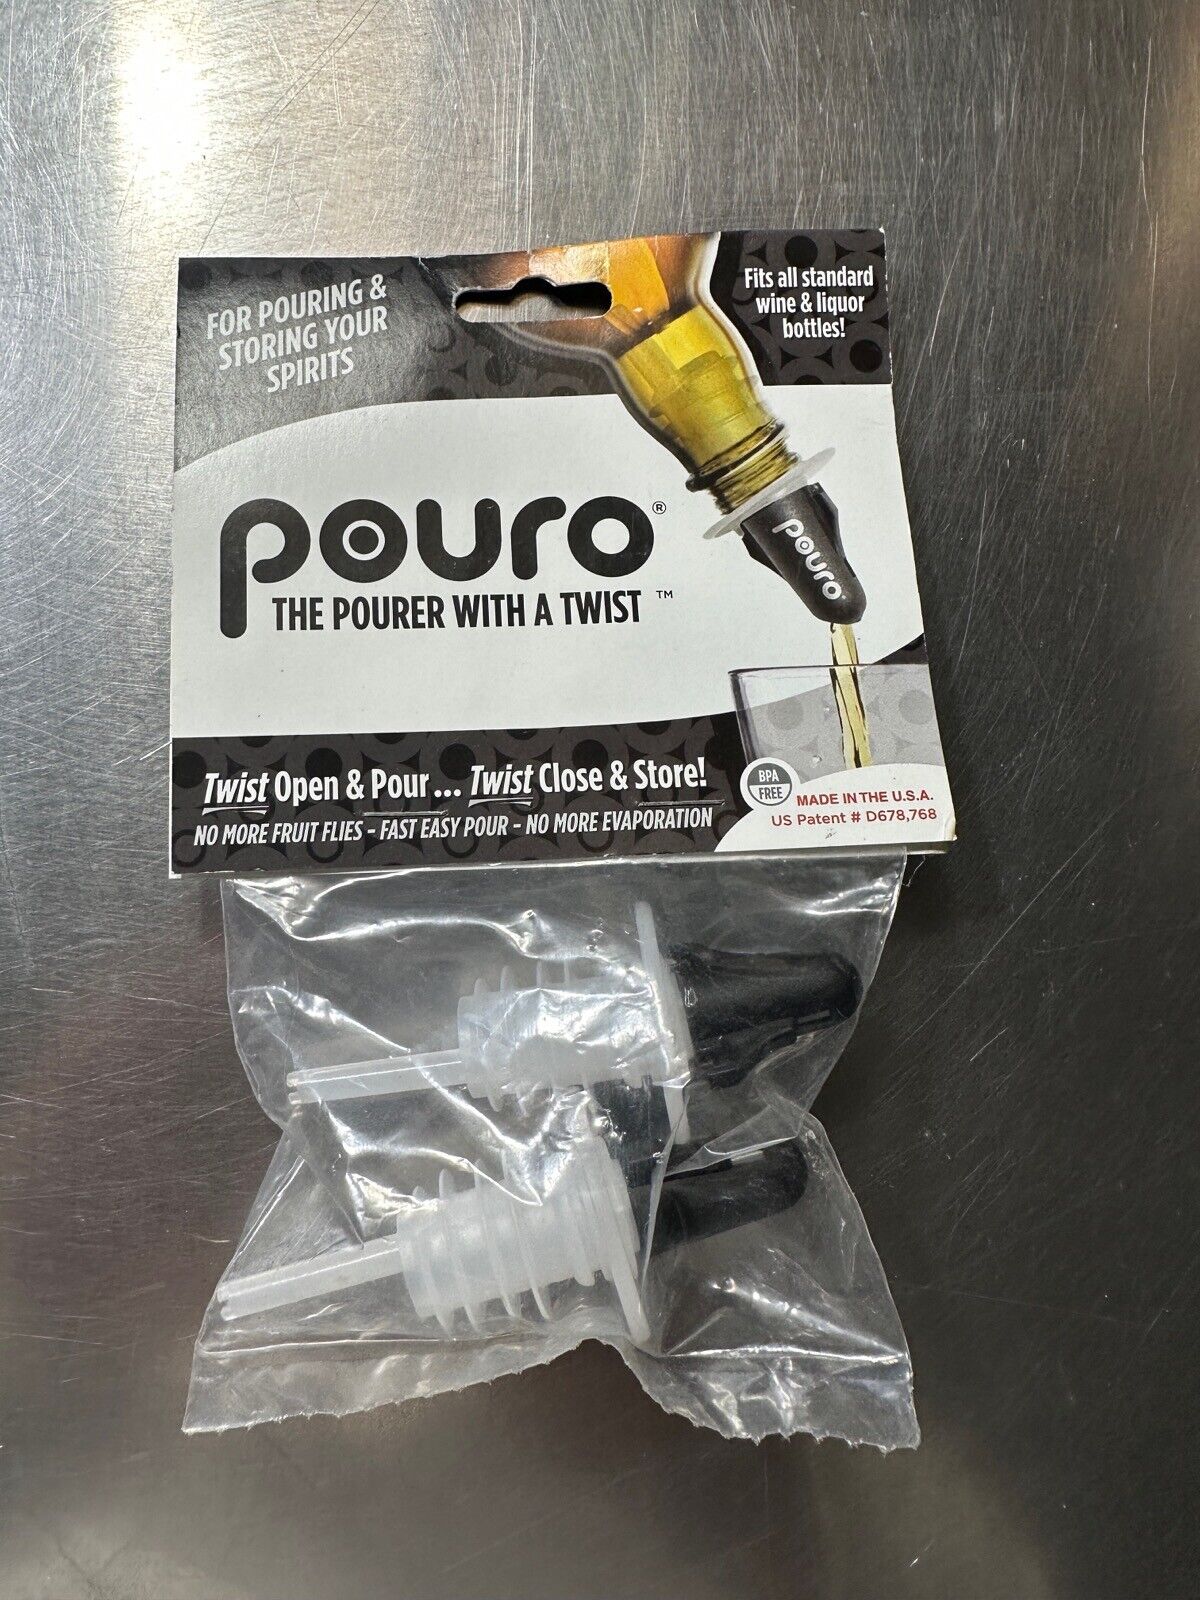 Pouro The Pourer With A Twist Pour And Store Spirits New In Pack